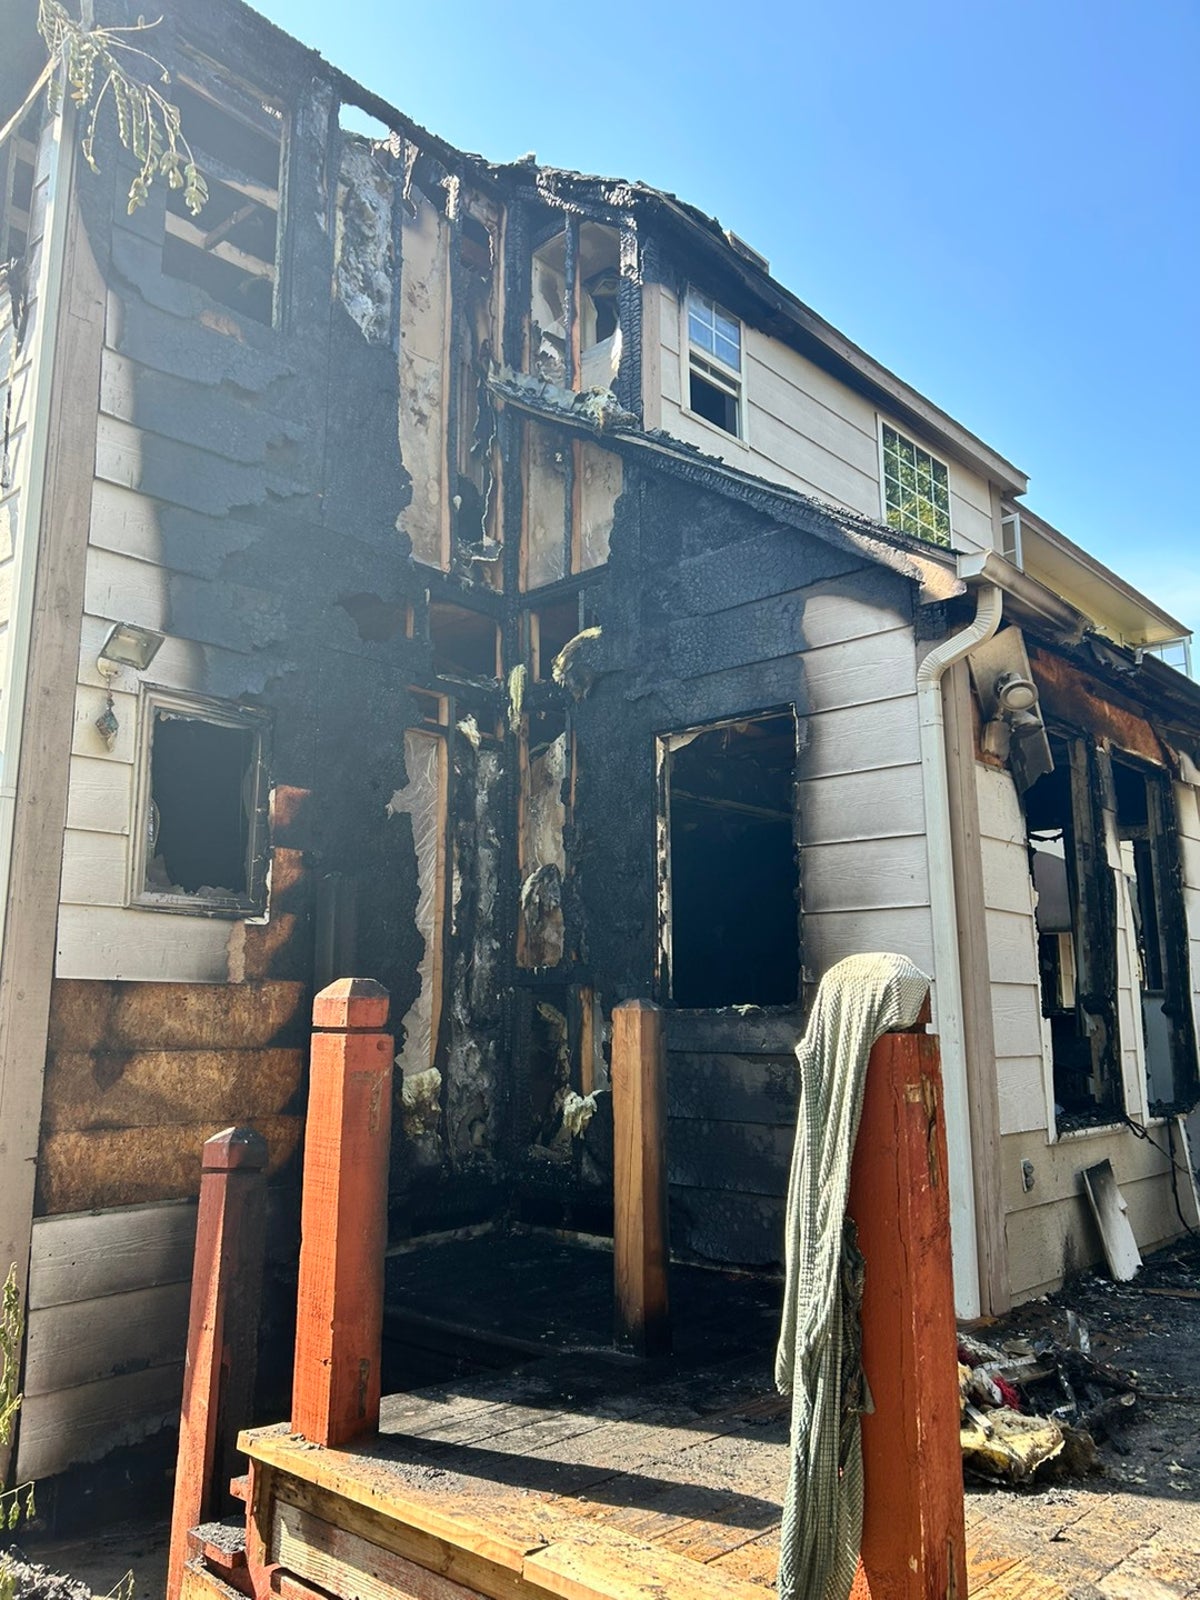 Couple’s house burns down in fire – but one tiny trick leaves bathroom untouched